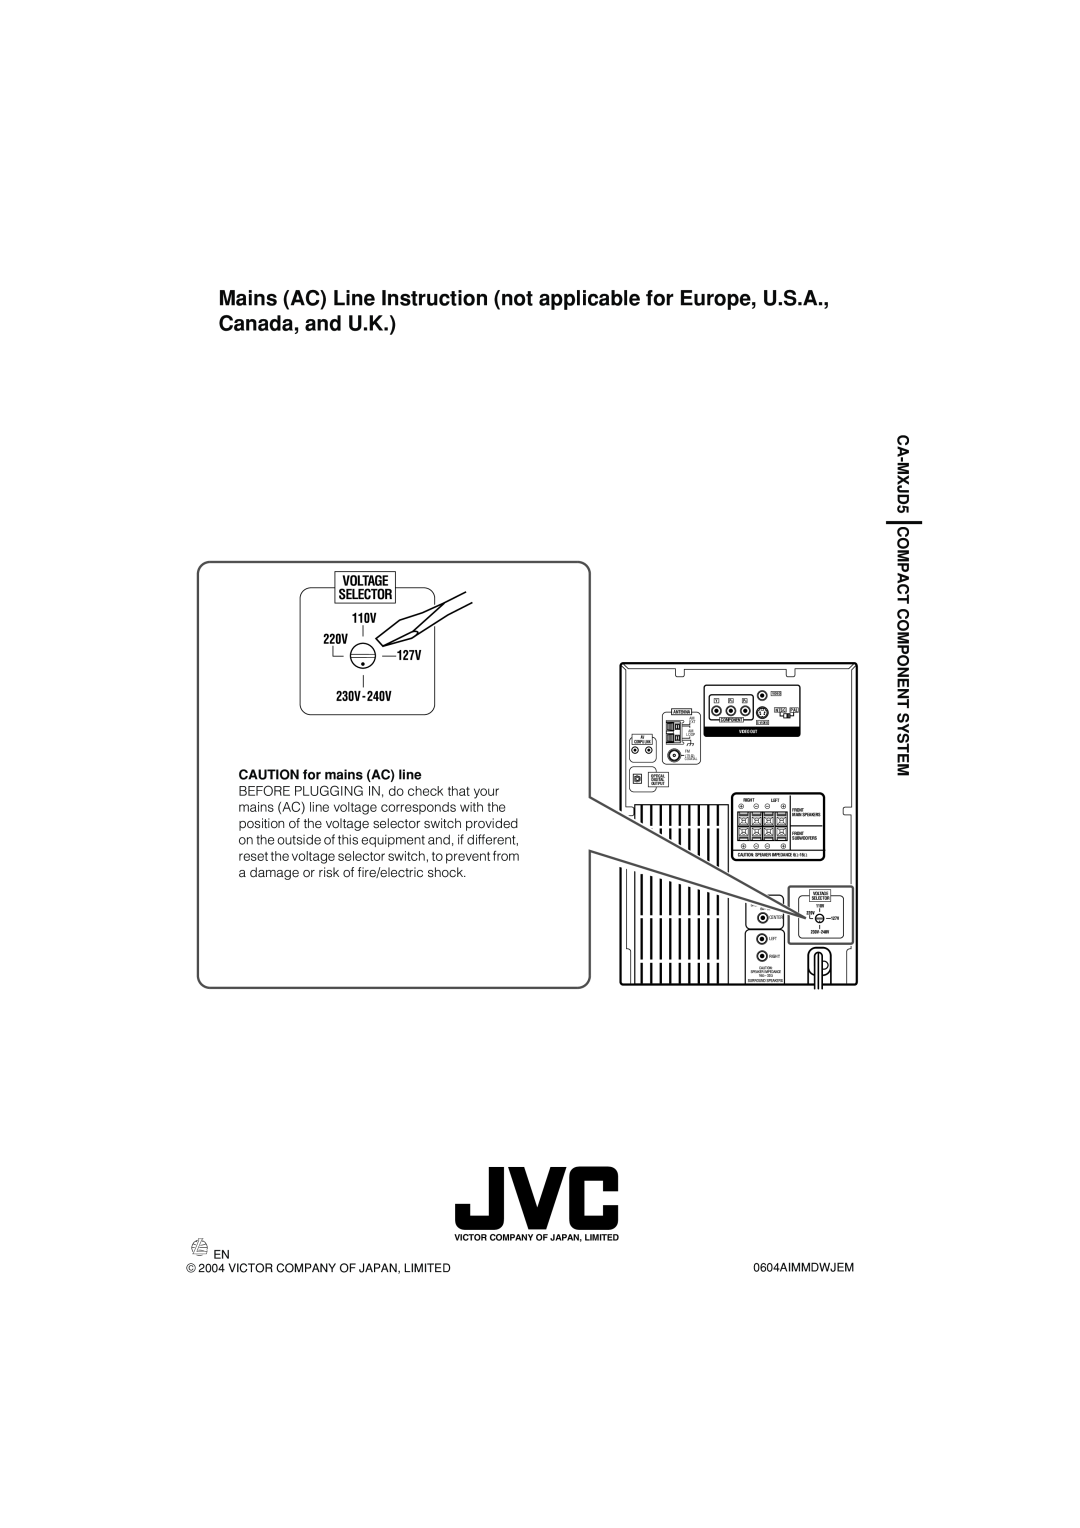 JVC manual CA-MXJD5COMPACT COMPONENT SYSTEM, VOLTAGE SELECTOR CAUTION for mains AC line 